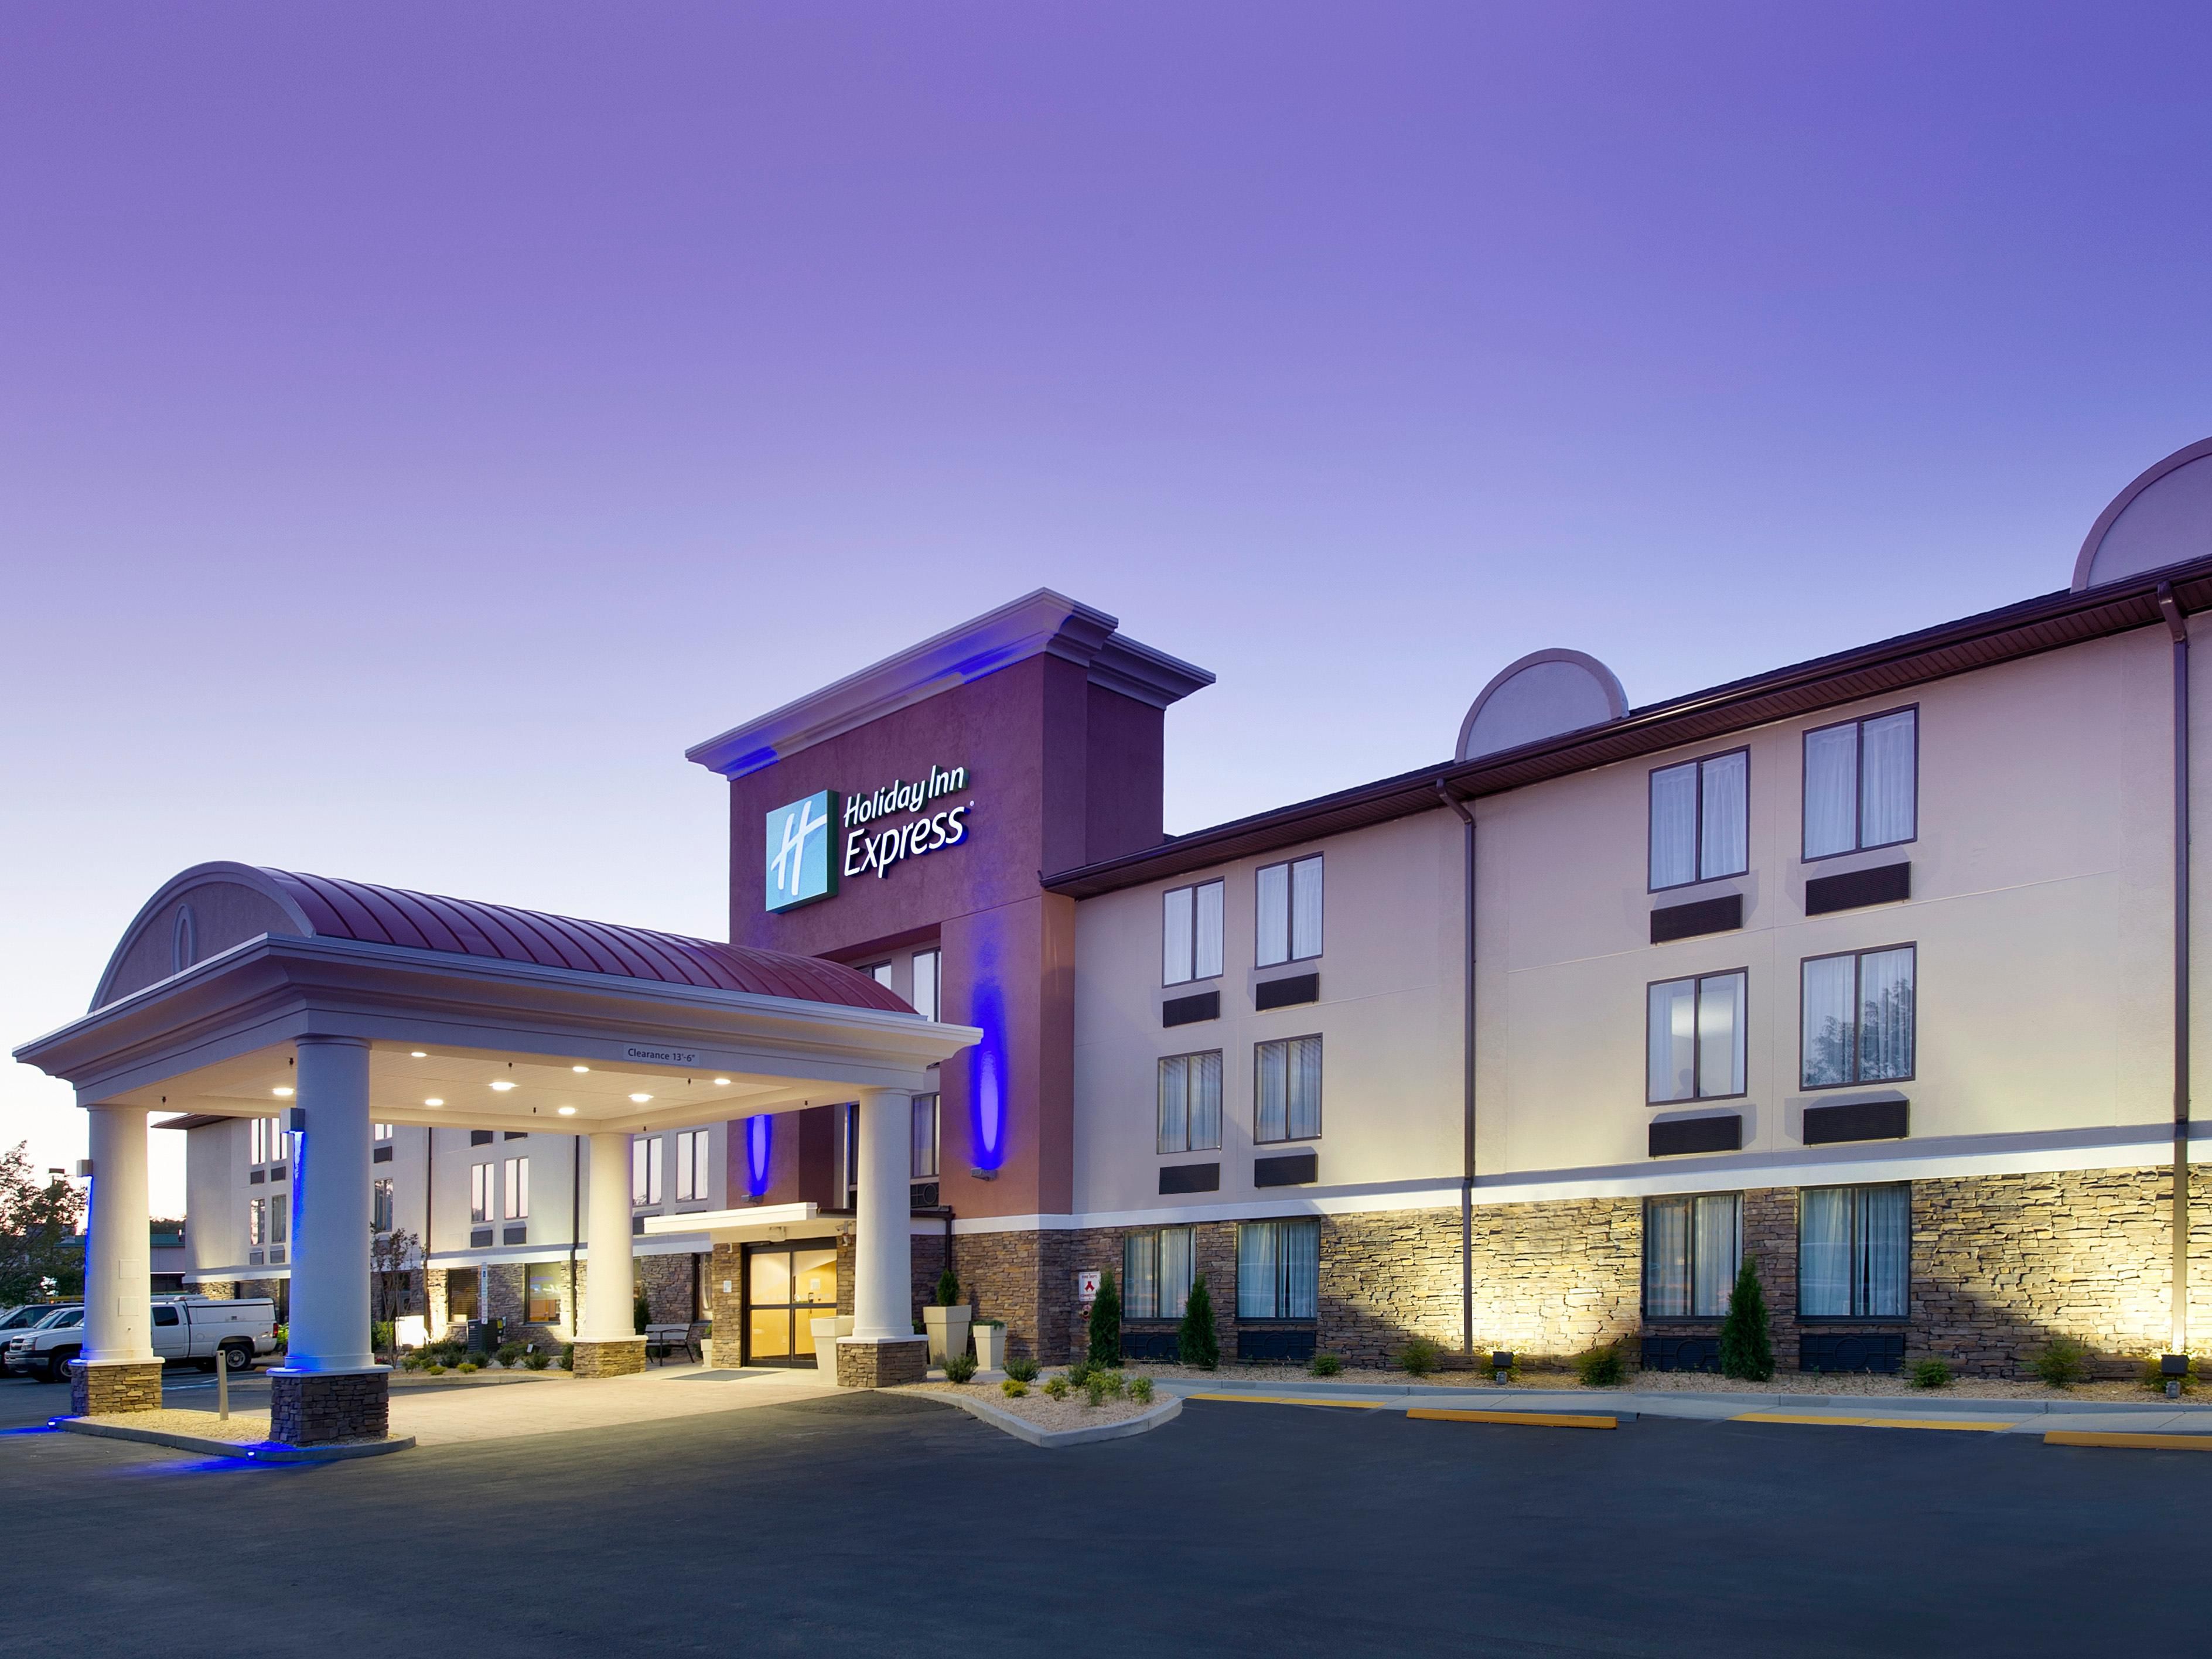 Hotels in waldorf md